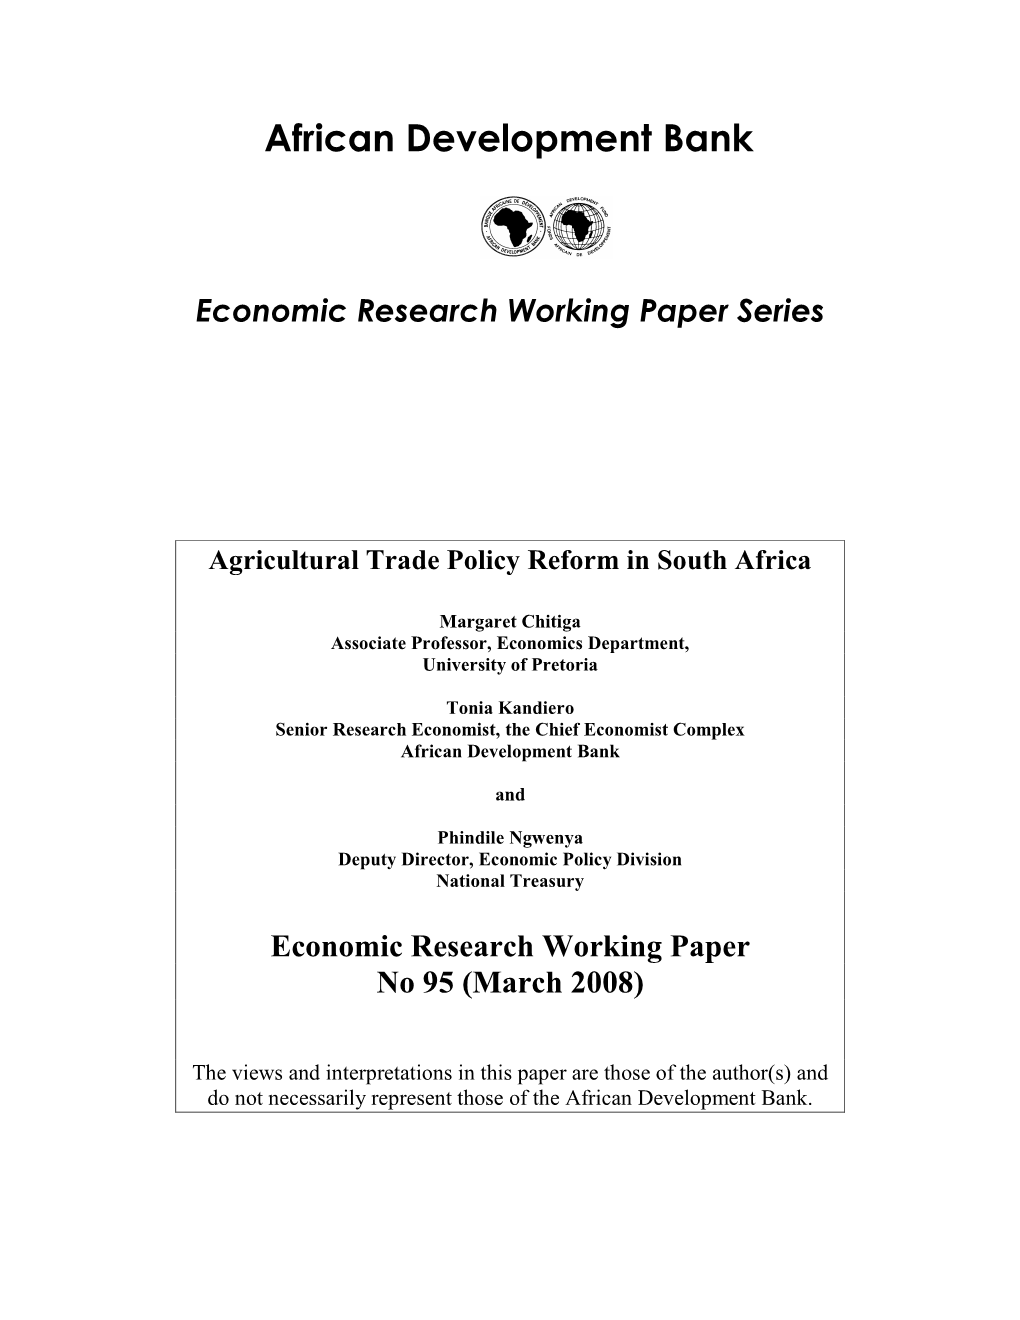 Agricultural Trade Policy Reform in South Africa